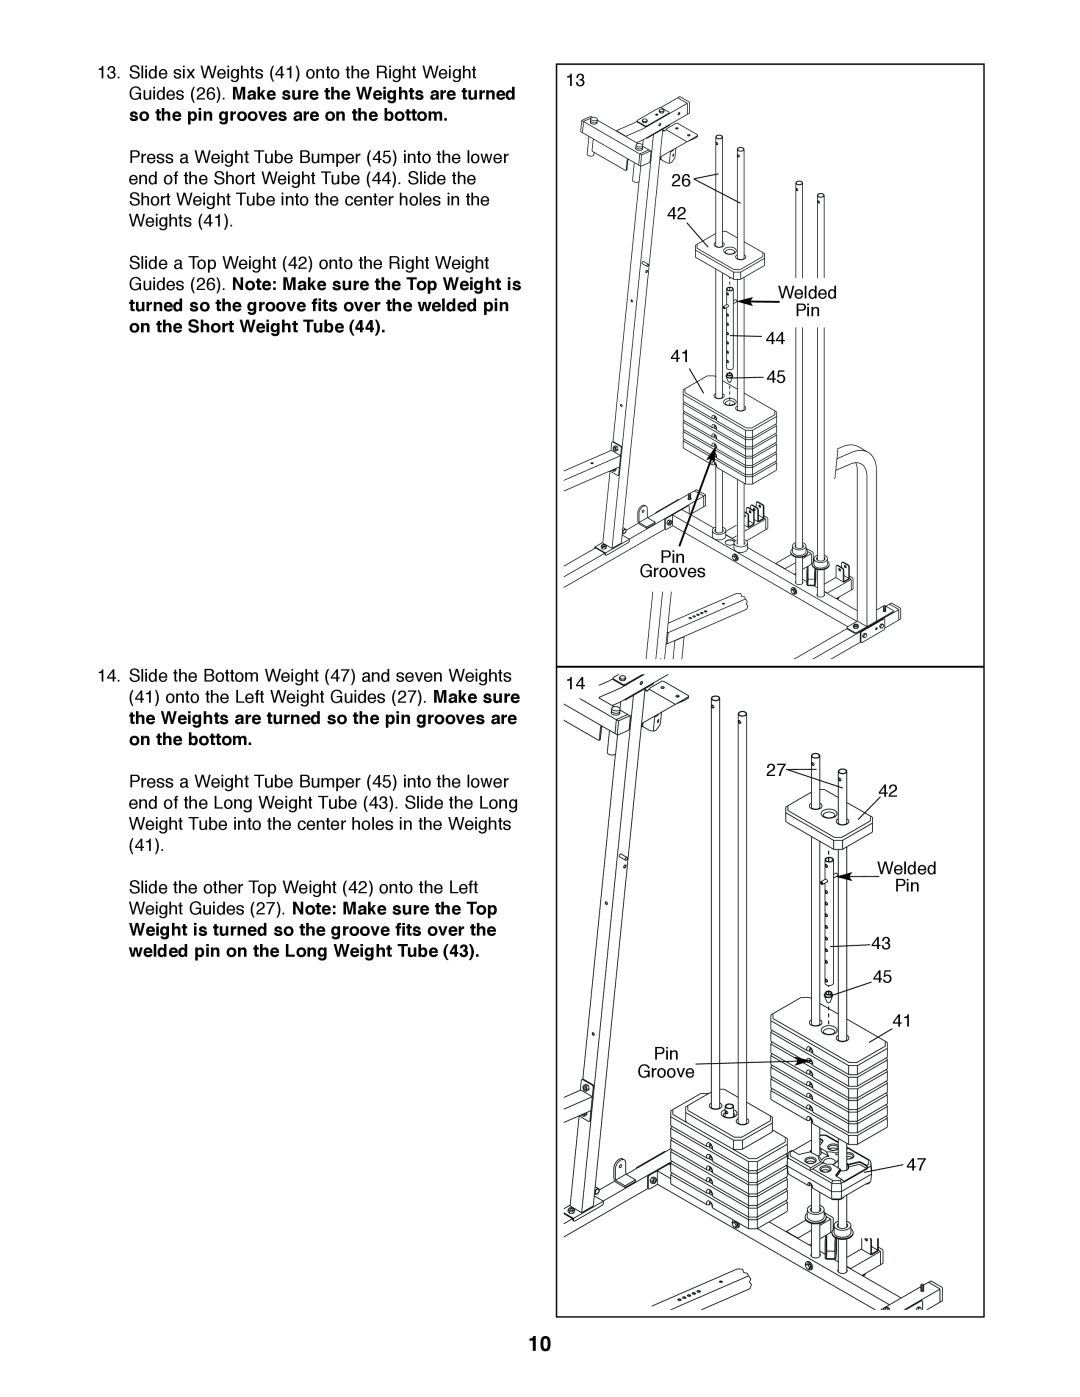 Weider 831.159830 user manual Guides 26. Make sure the Weights are turned 